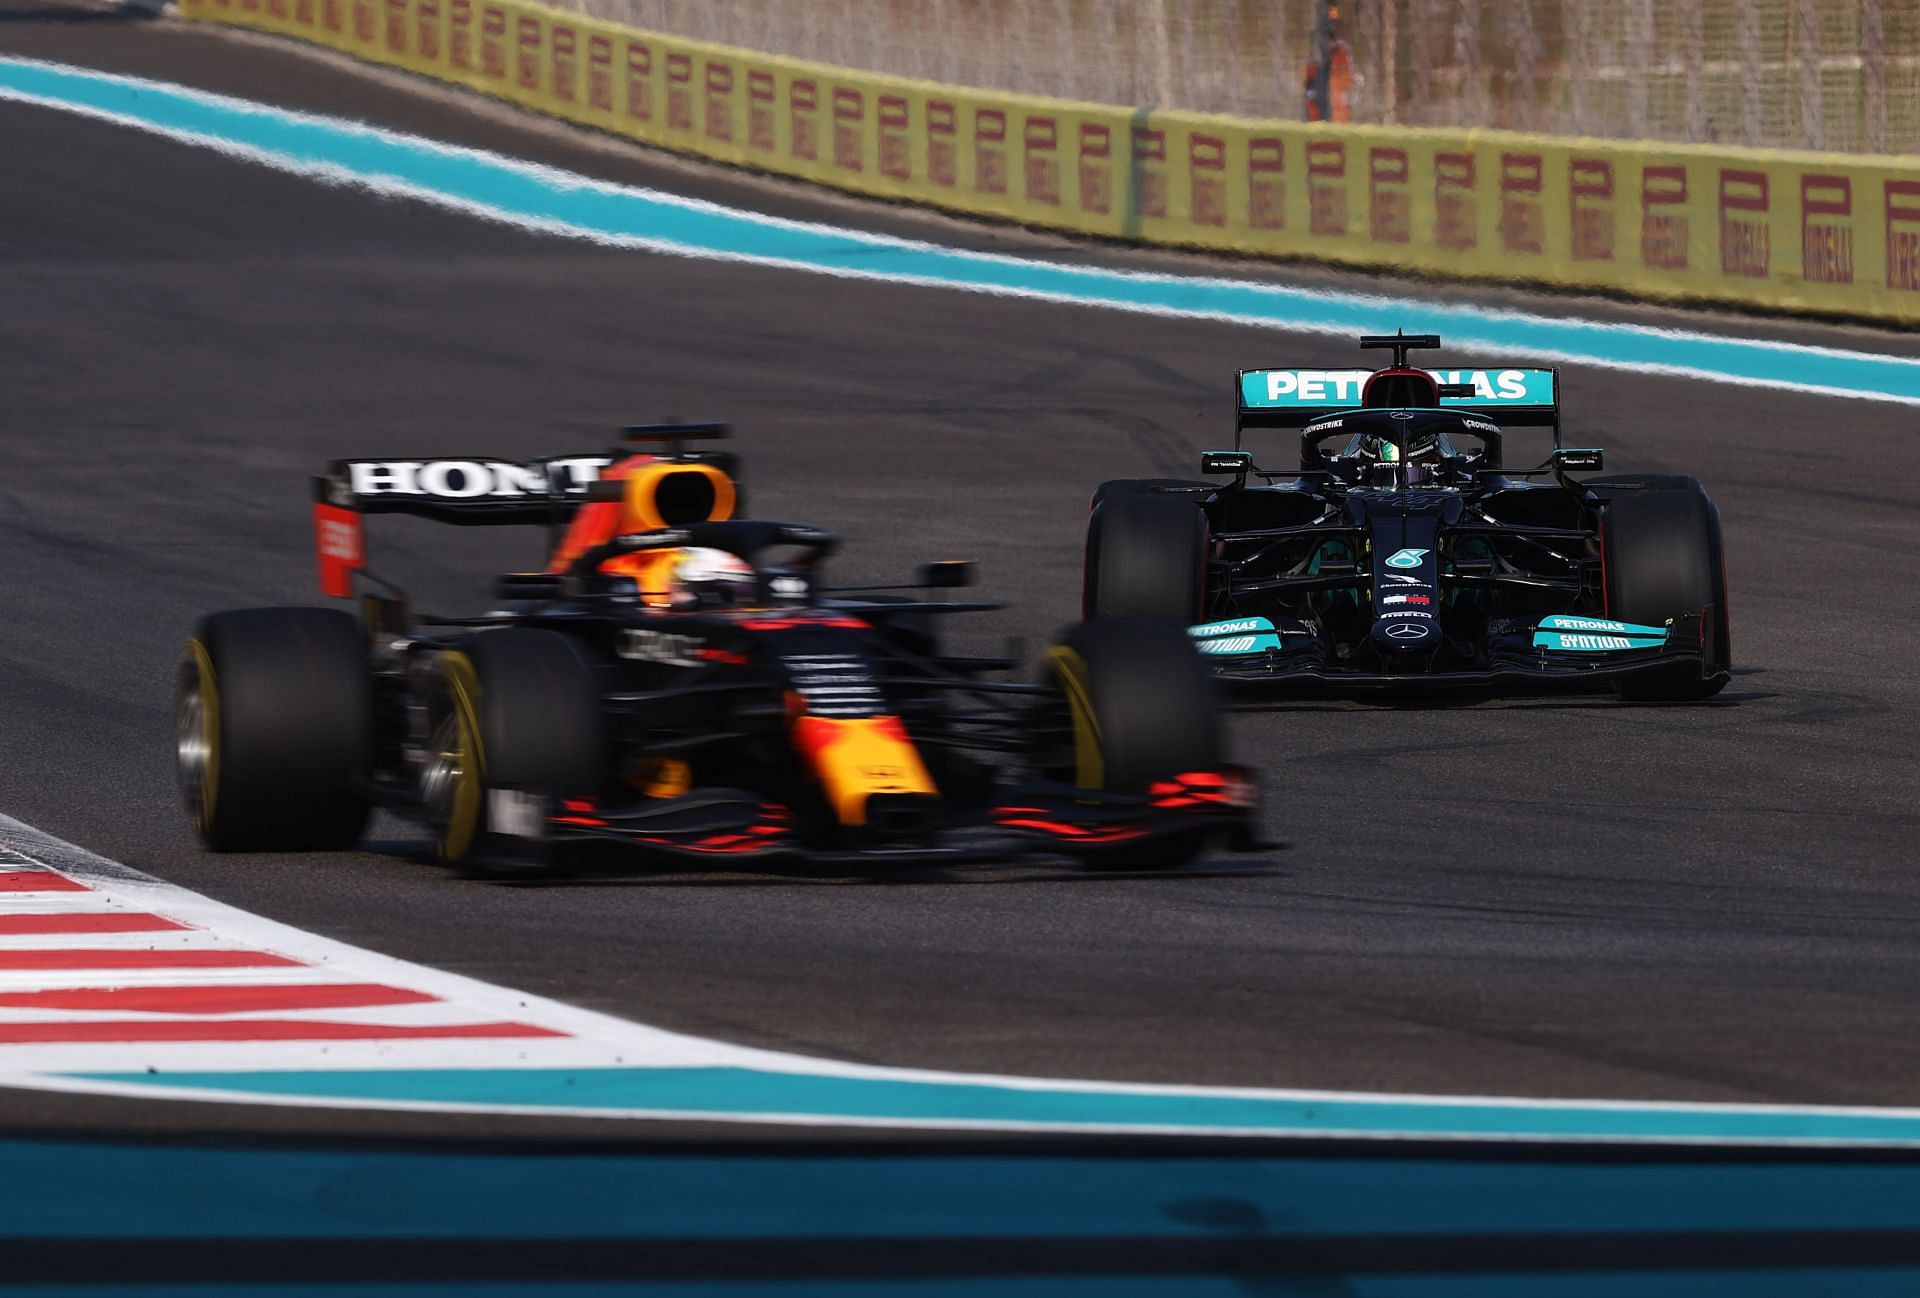 Lewis Hamilton and Max Verstappen at the F1 Grand Prix of Abu Dhabi - Final Practice